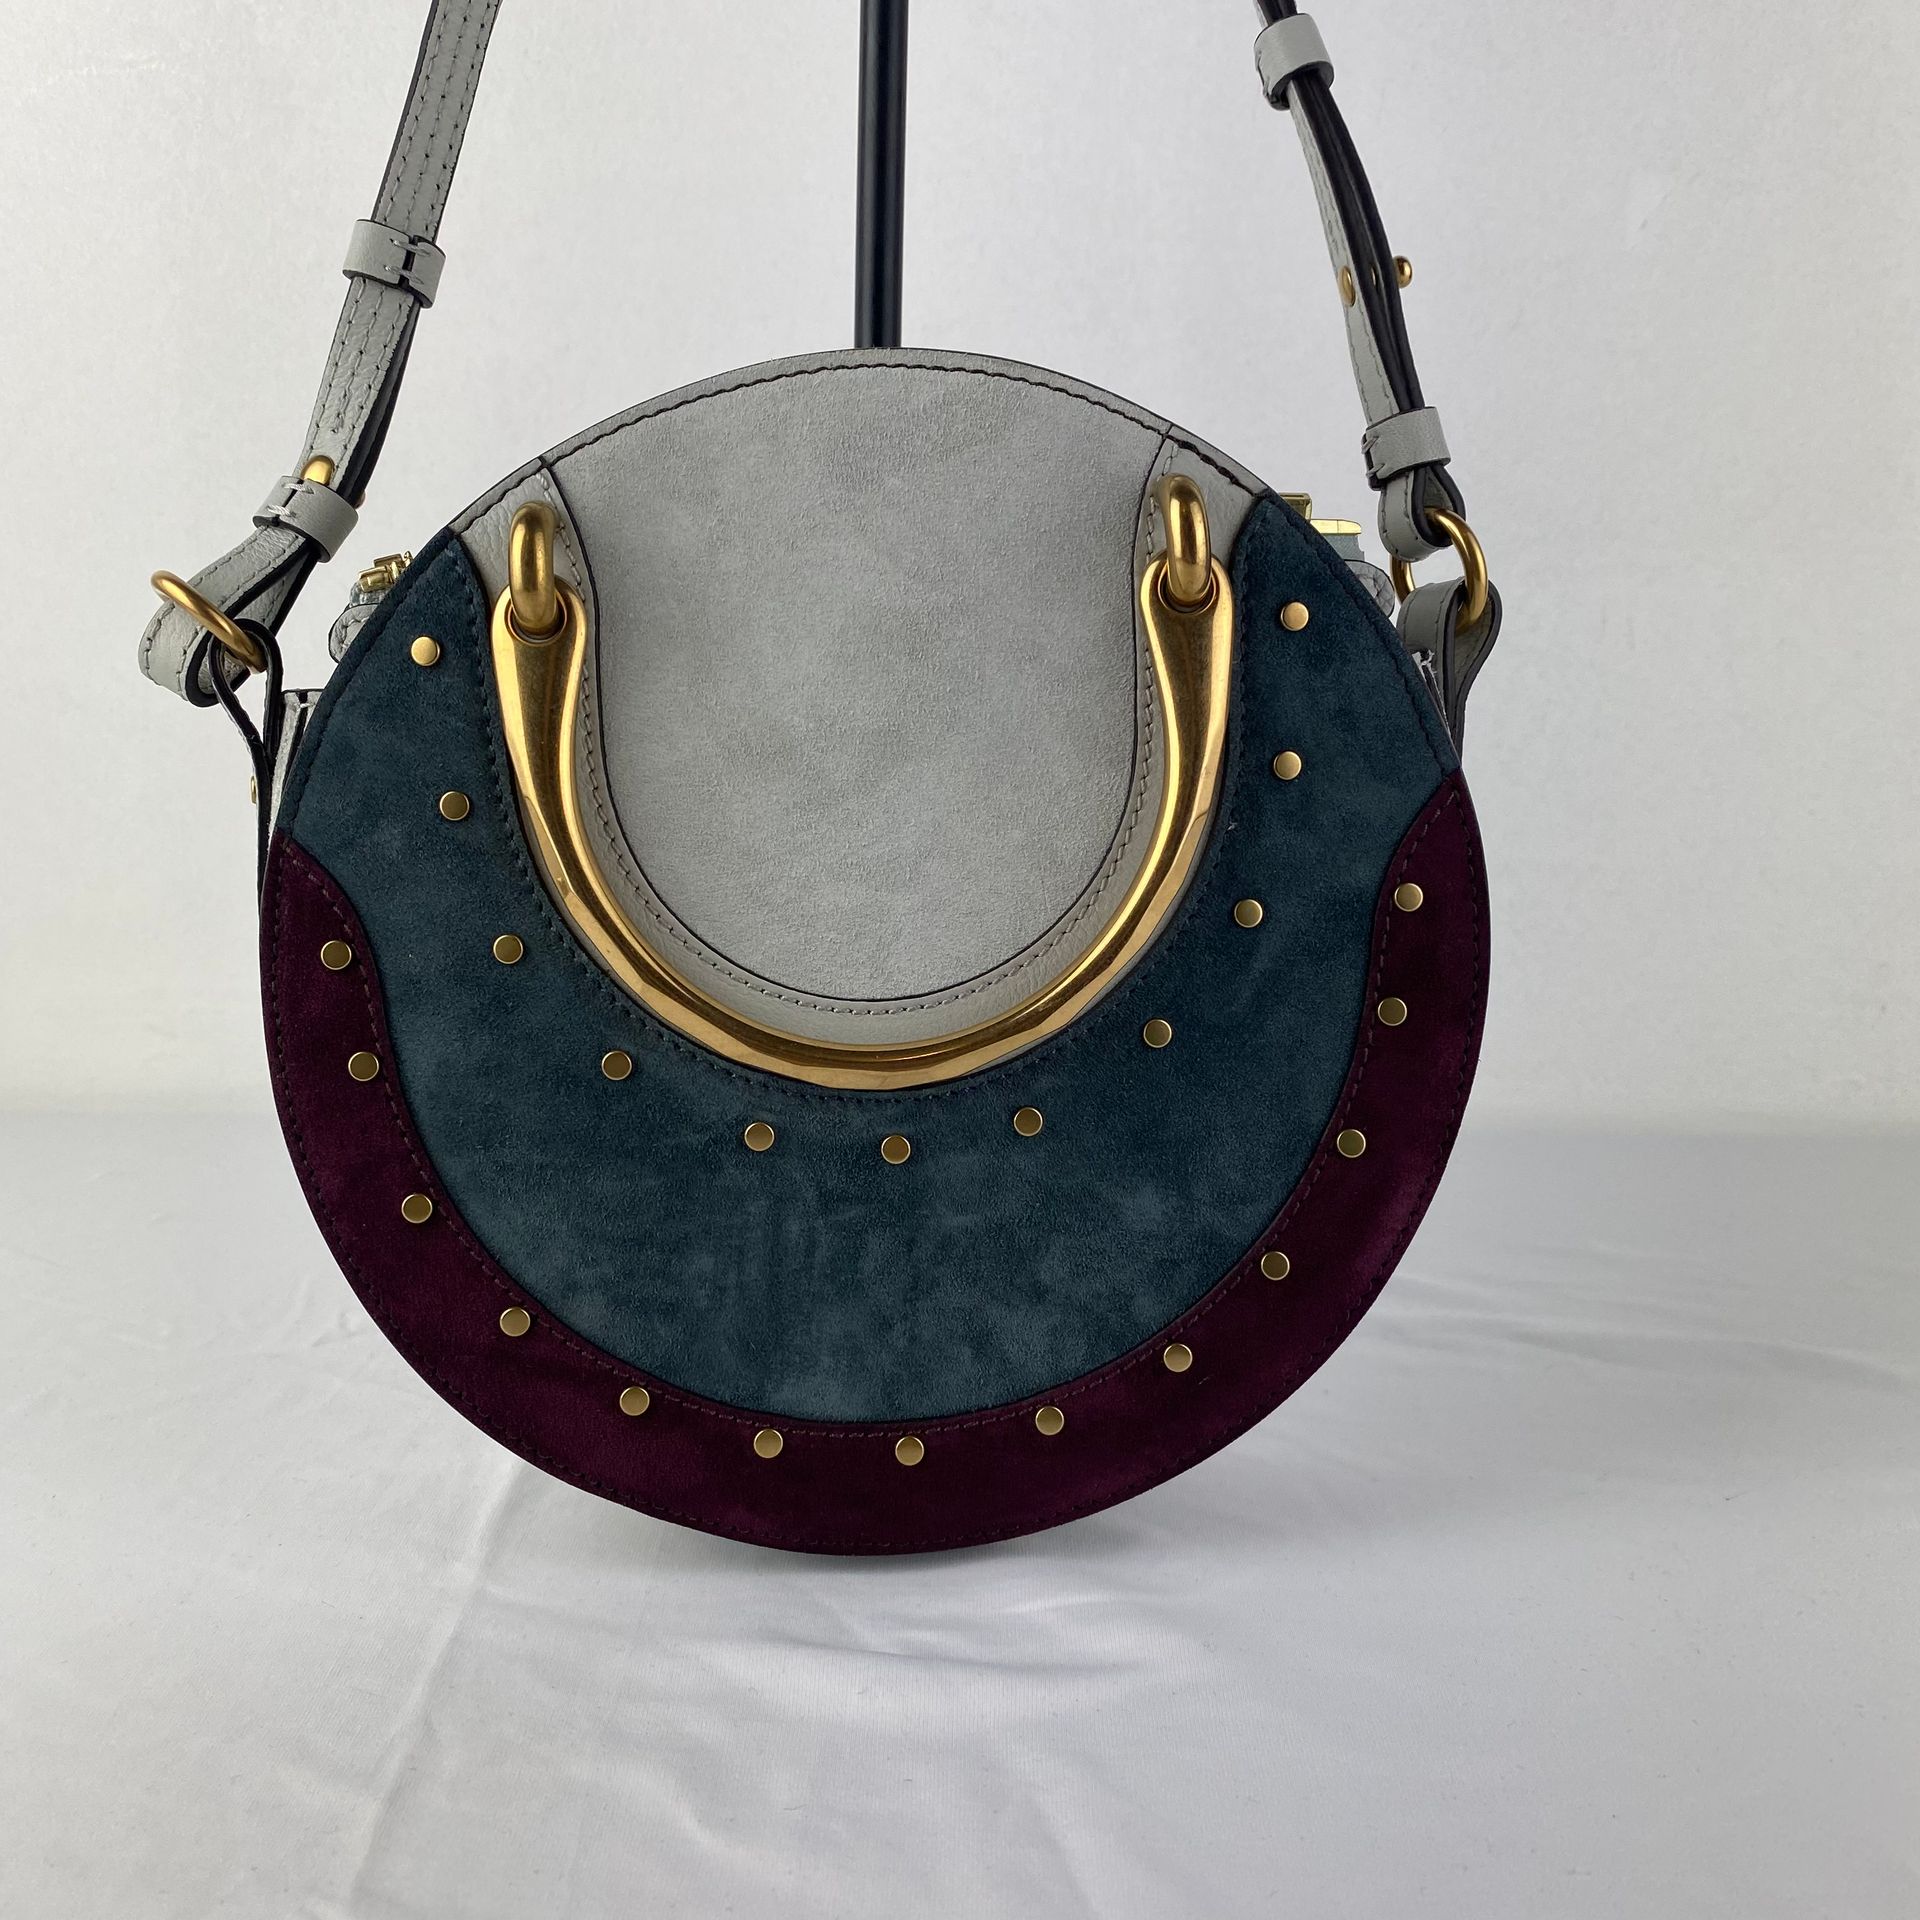 CHLOE Bag CHLOE model Pixie in suede multicolor with shoulder strap Pixie size 2&hellip;